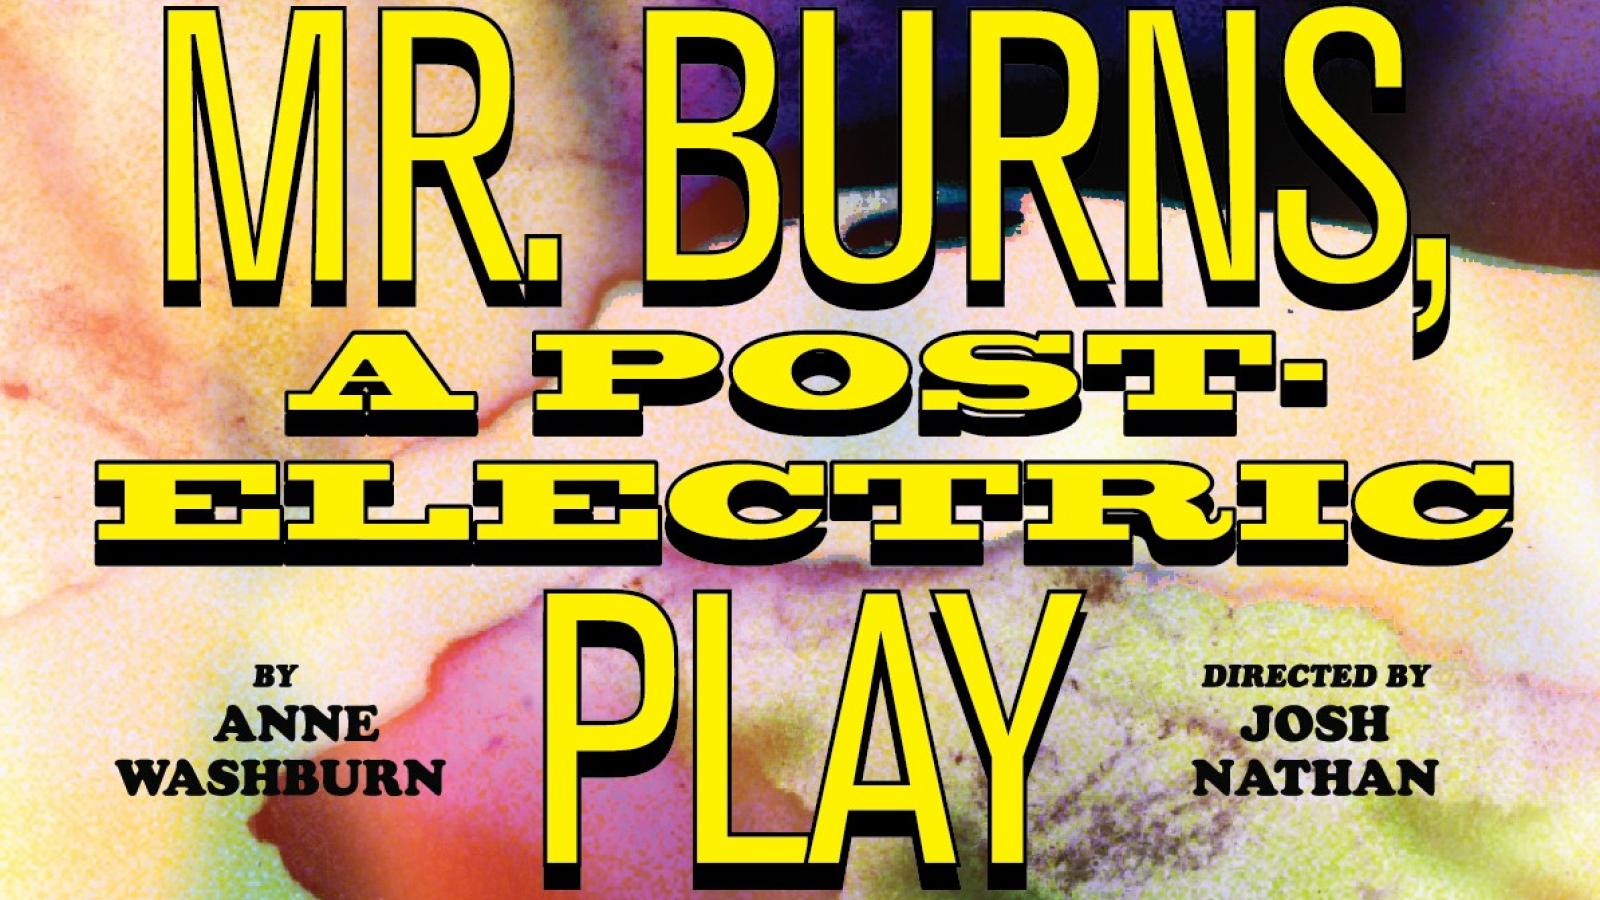 Poster for Mr. Burns, A Post-Electric Play